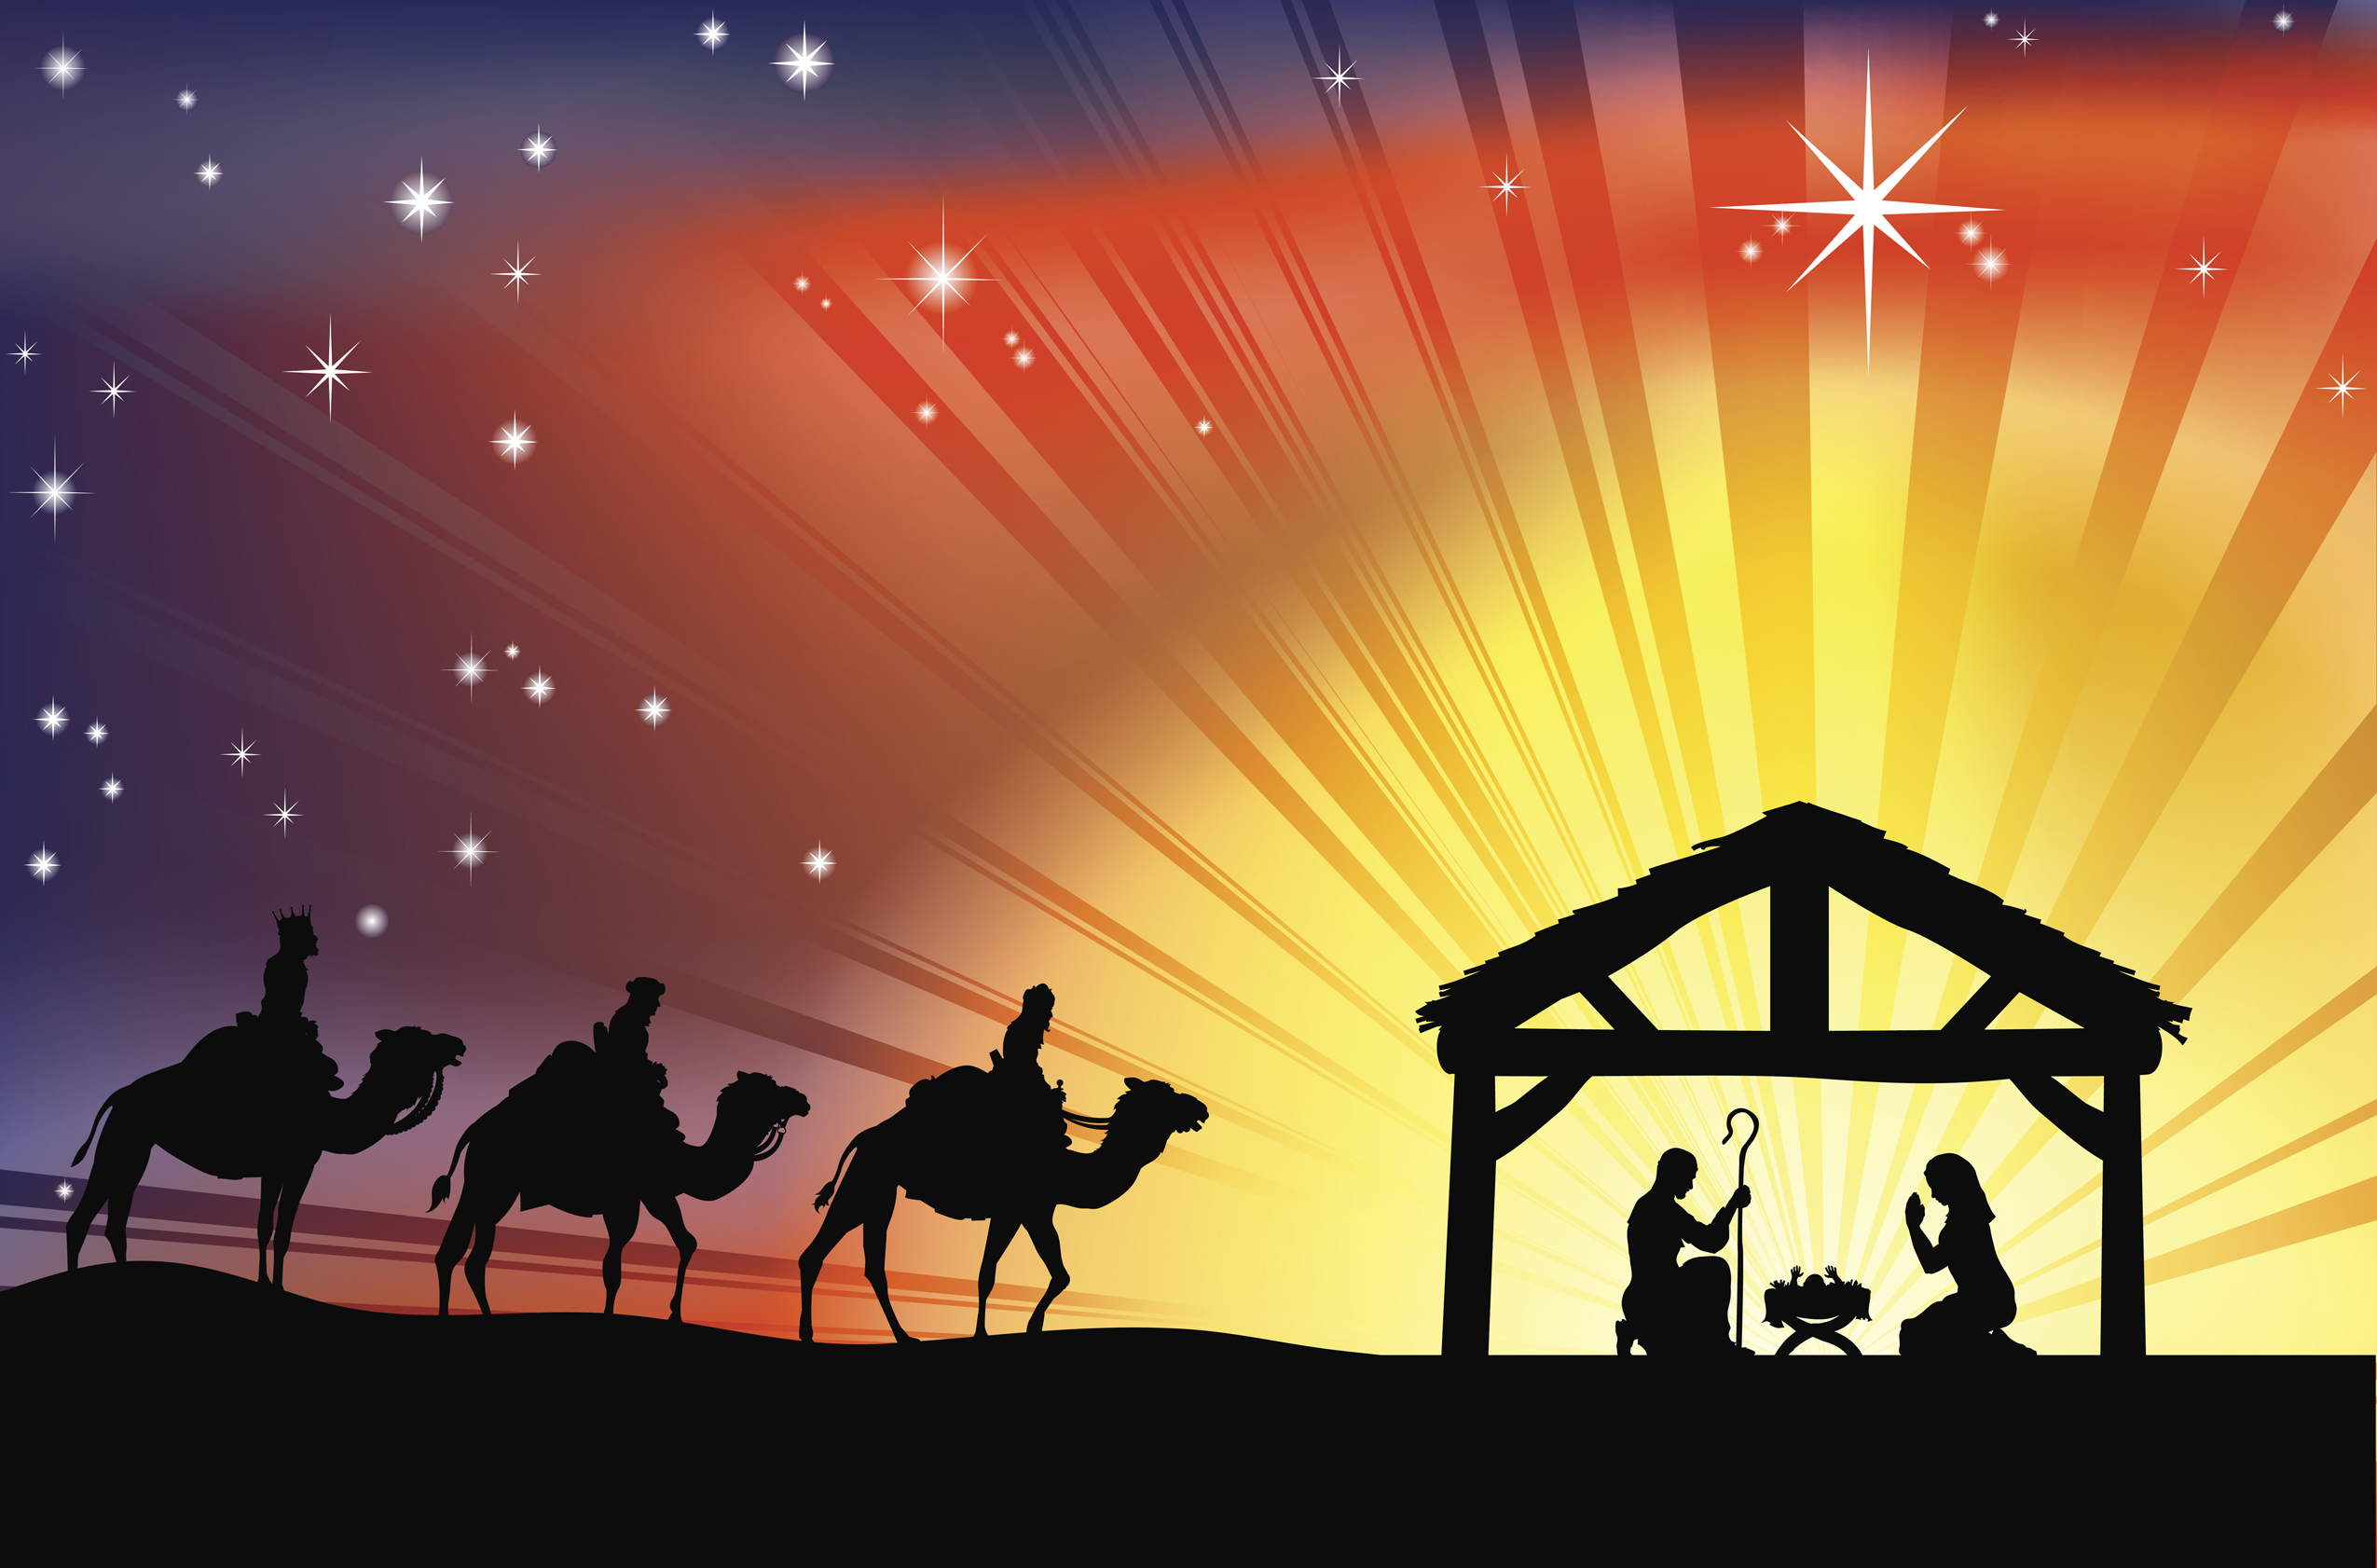 Merry Christmas Nativity Images Merry Christmas